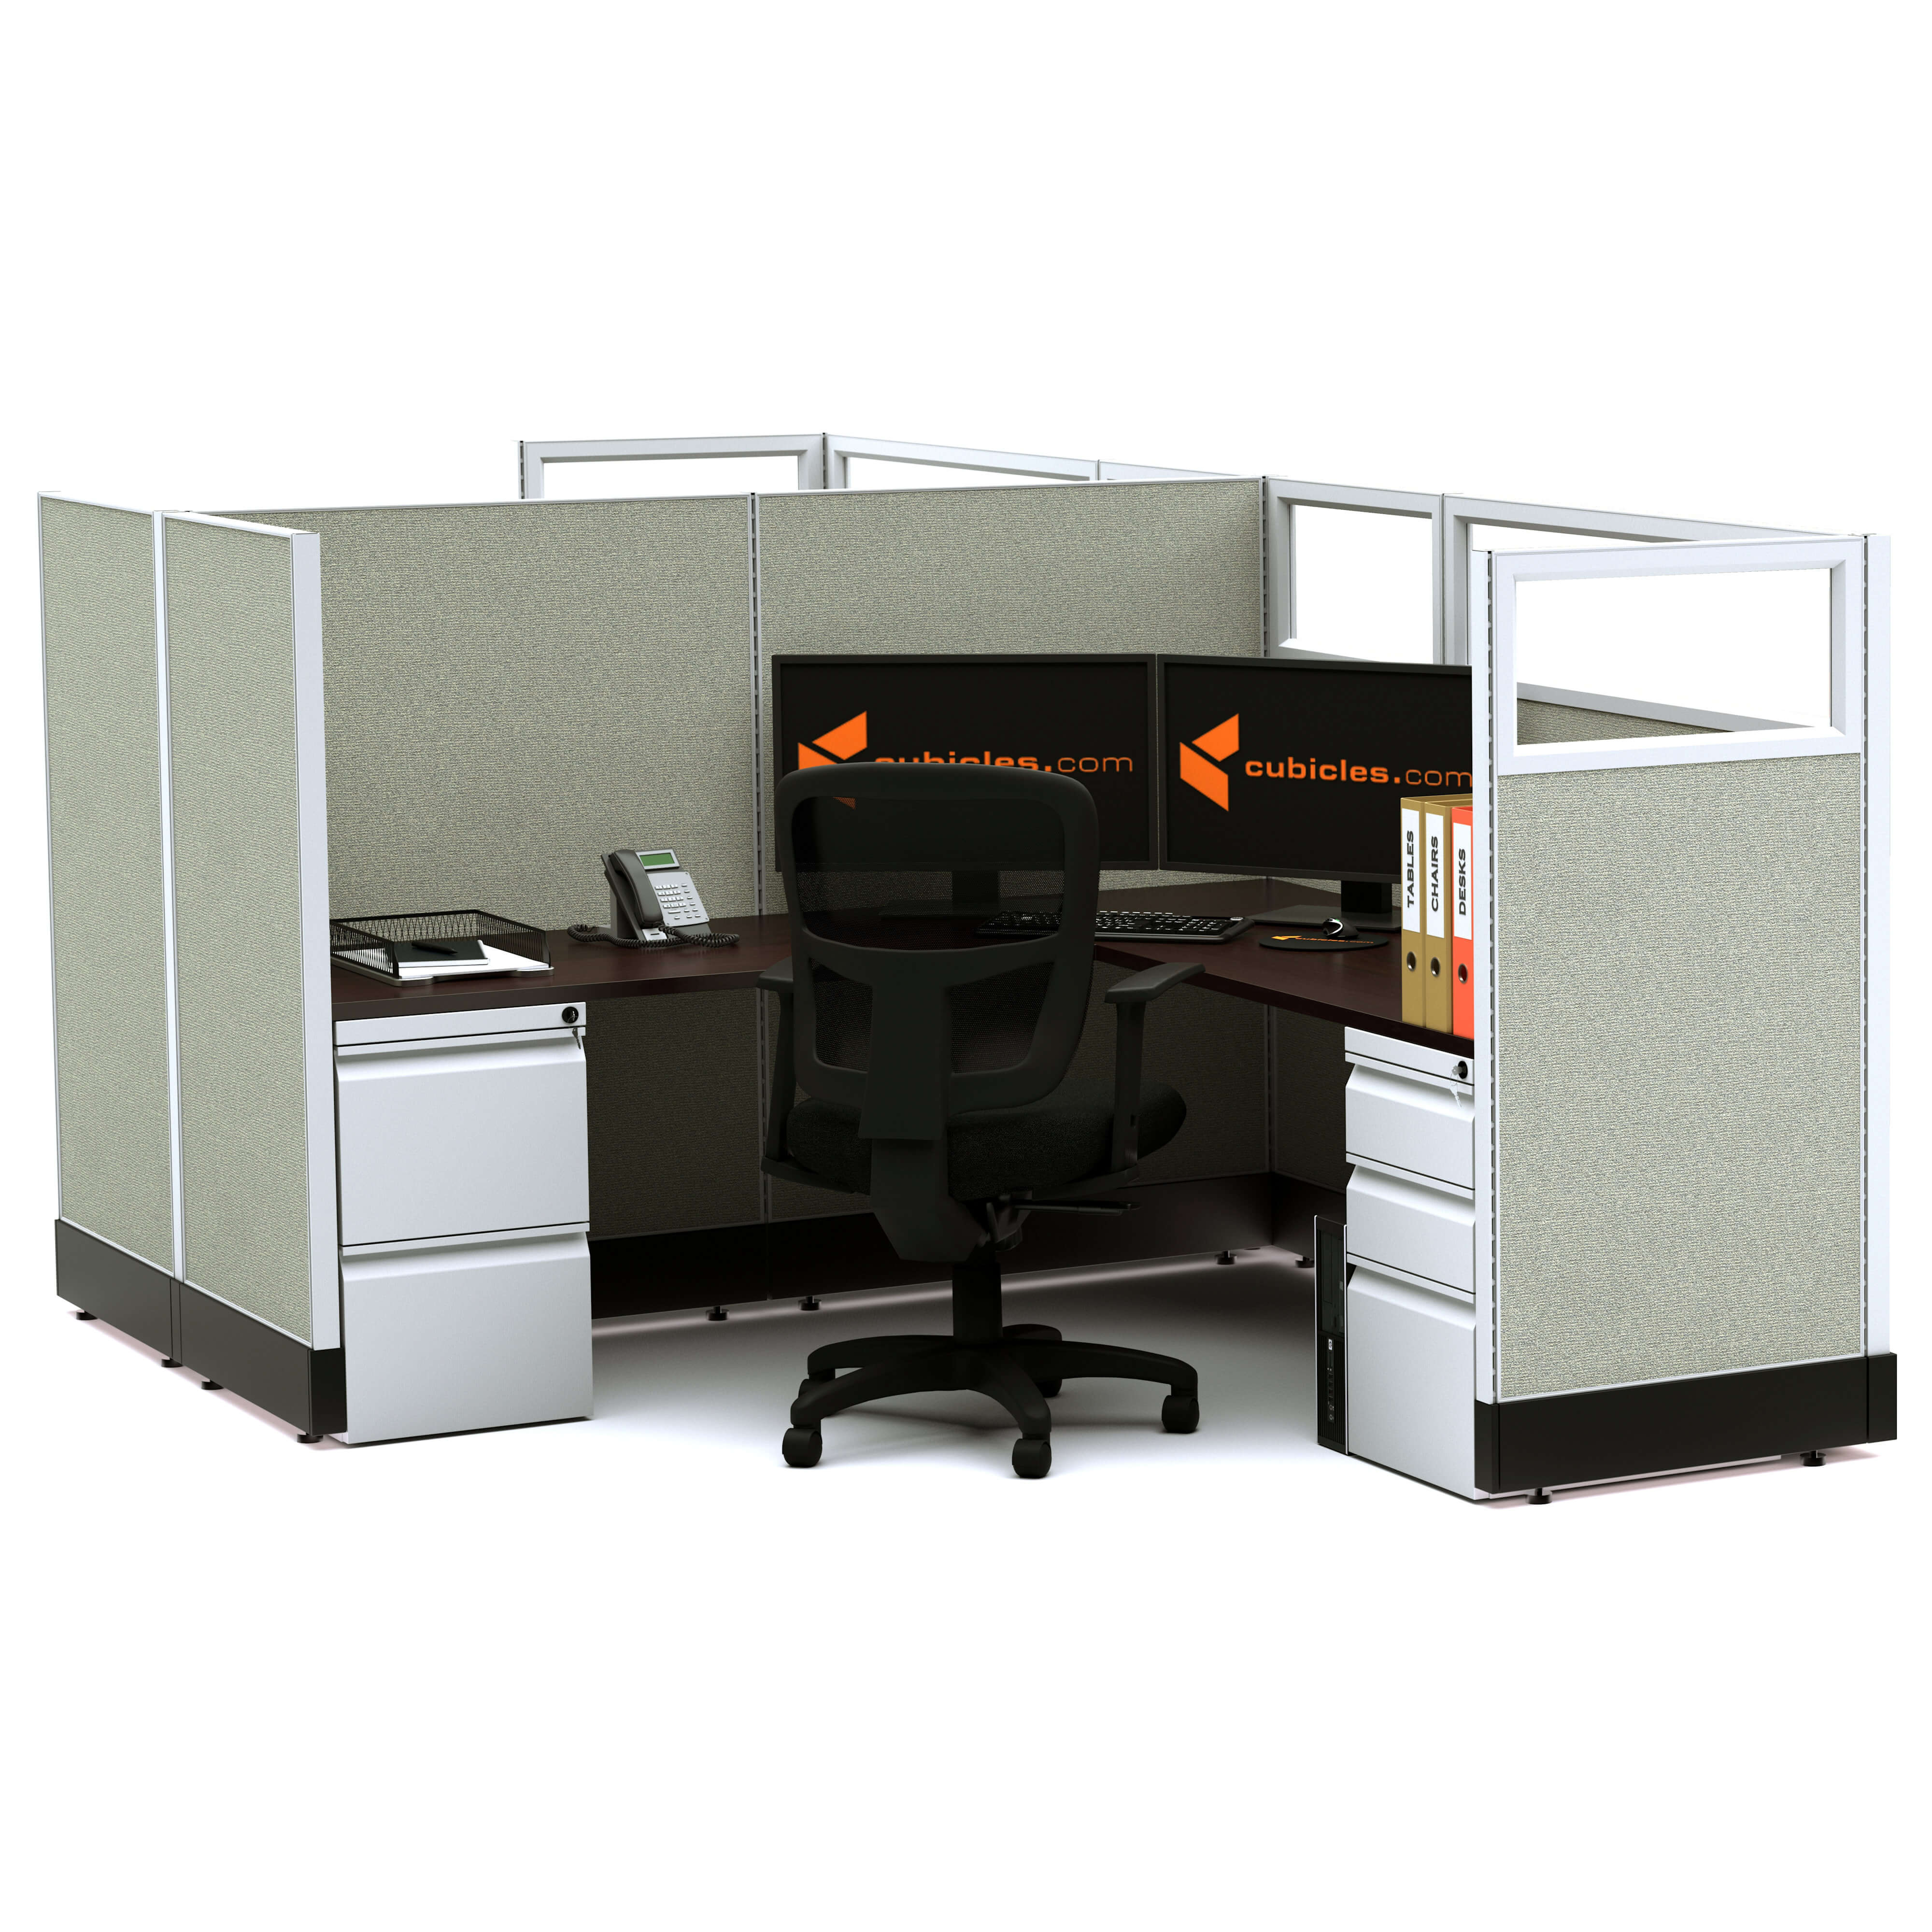 modular-office-furniture-partial-glass-office-cubicles-53h-2pack-cluster-non-powered.jpg